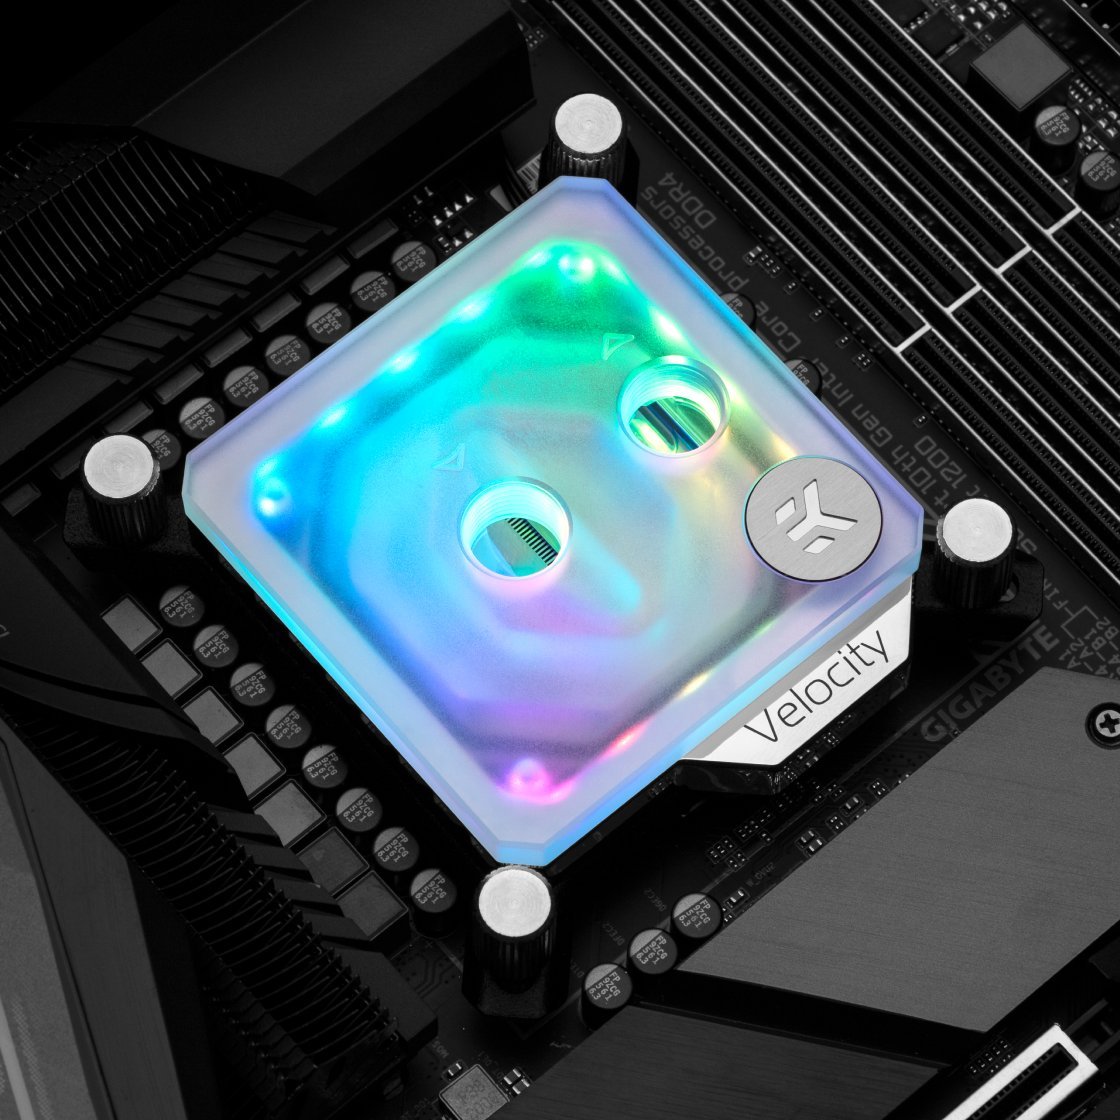 More information about "Cpu blocks Ek velocity d-rgb frost"